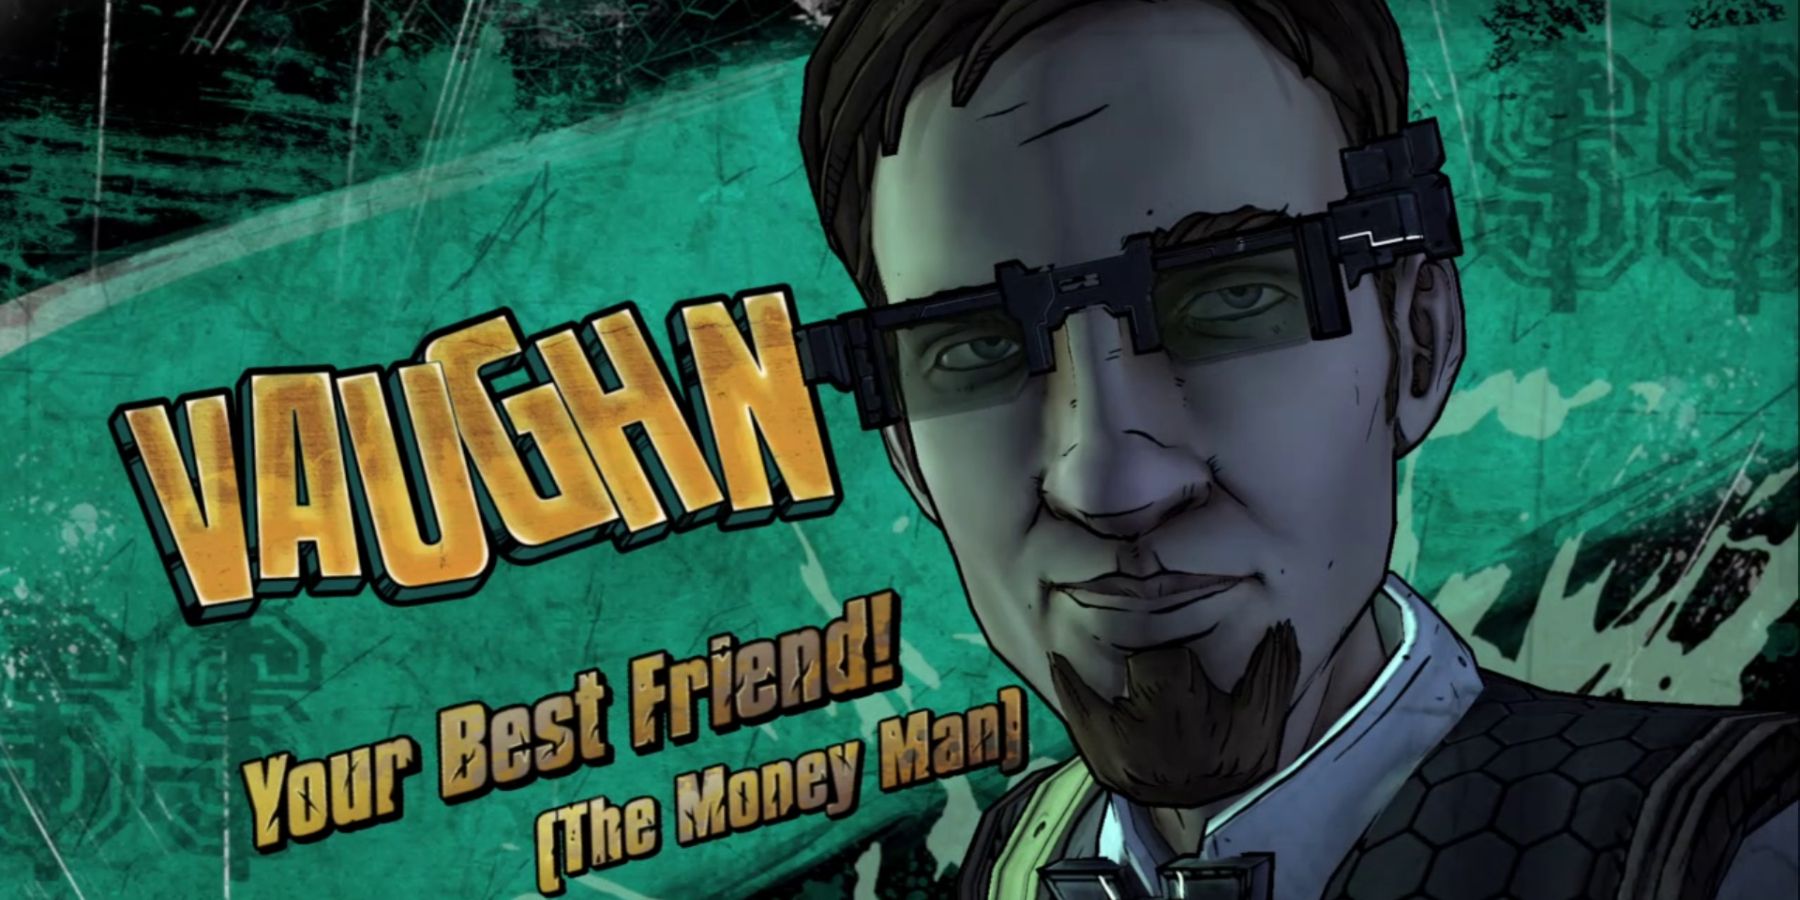 a bespectacled man with a chin beard next to words that read "Vaugh: your best friend! (the money man)"